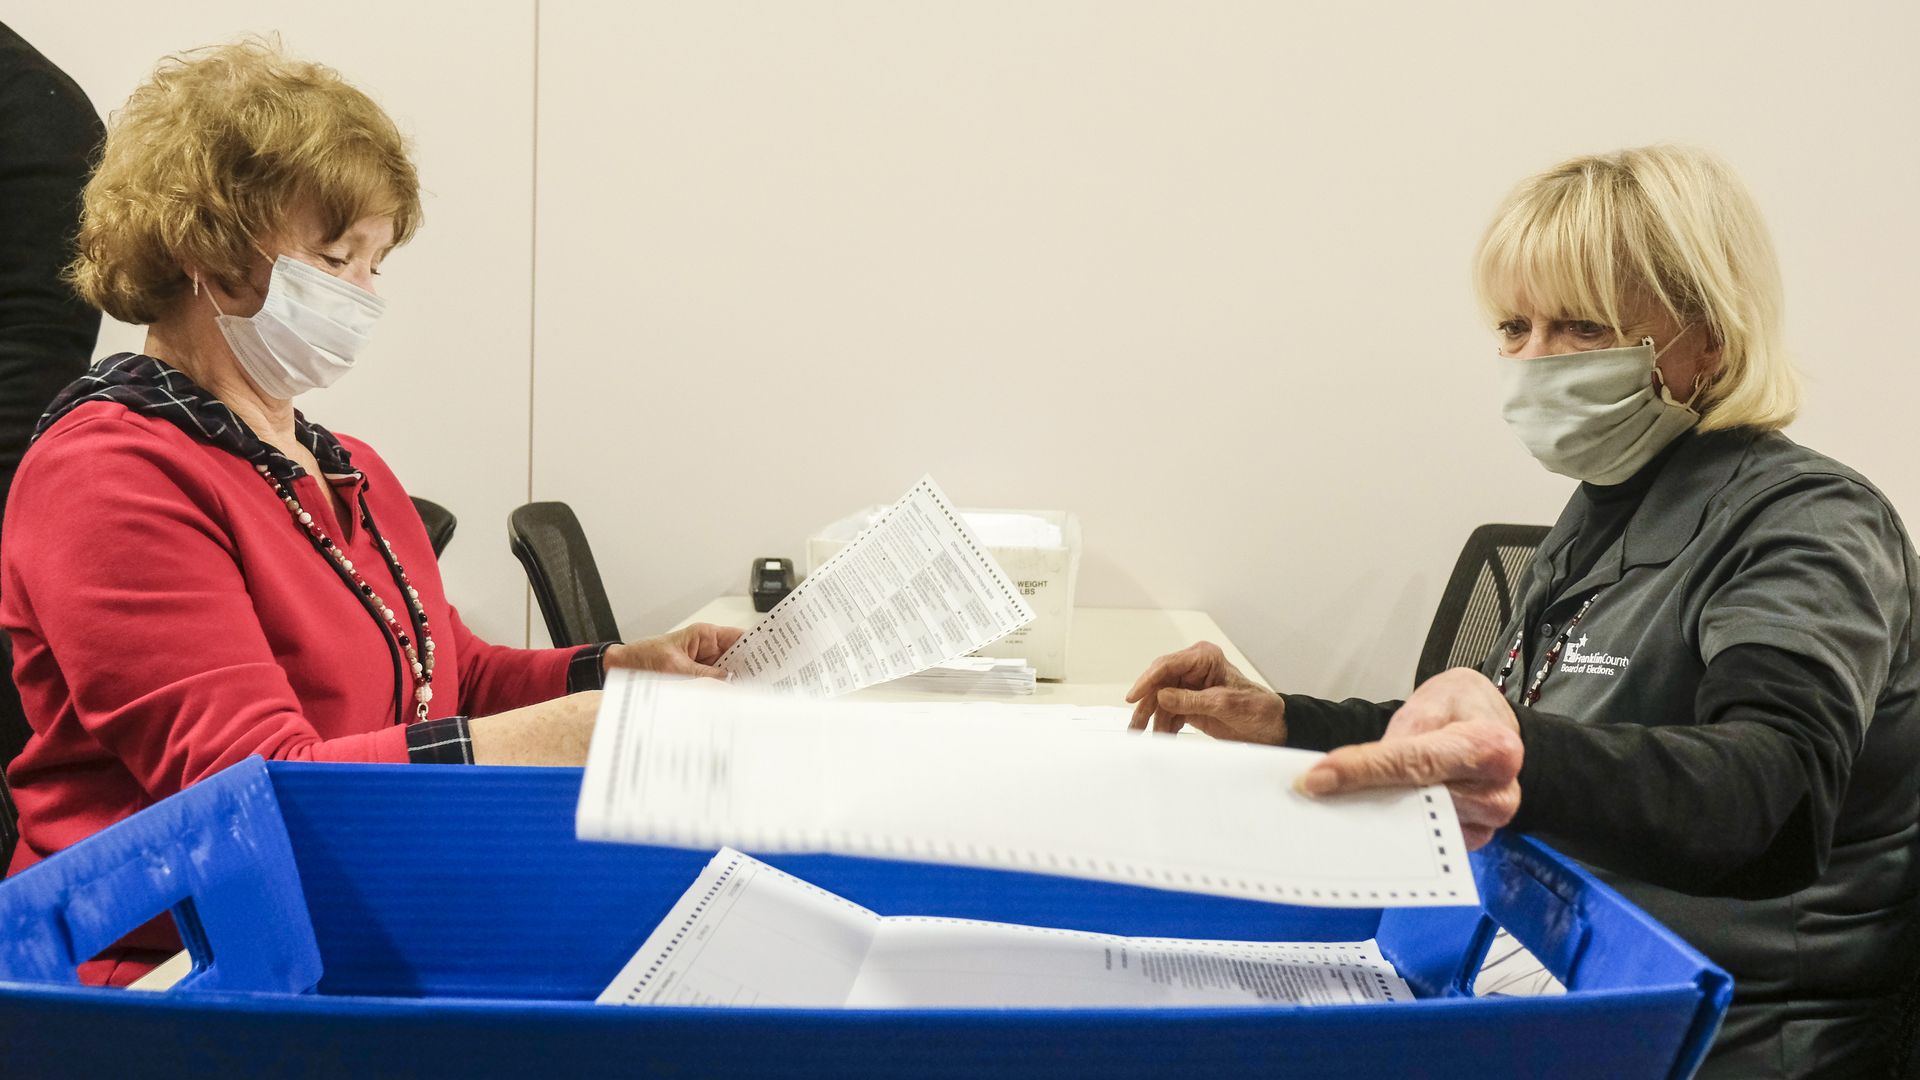 Employees and volunteers of the Franklin County Board of Elections sort through, and de-stub both mail in ballots and provisional ballots on April 28, 2020 in Columbus, Ohio